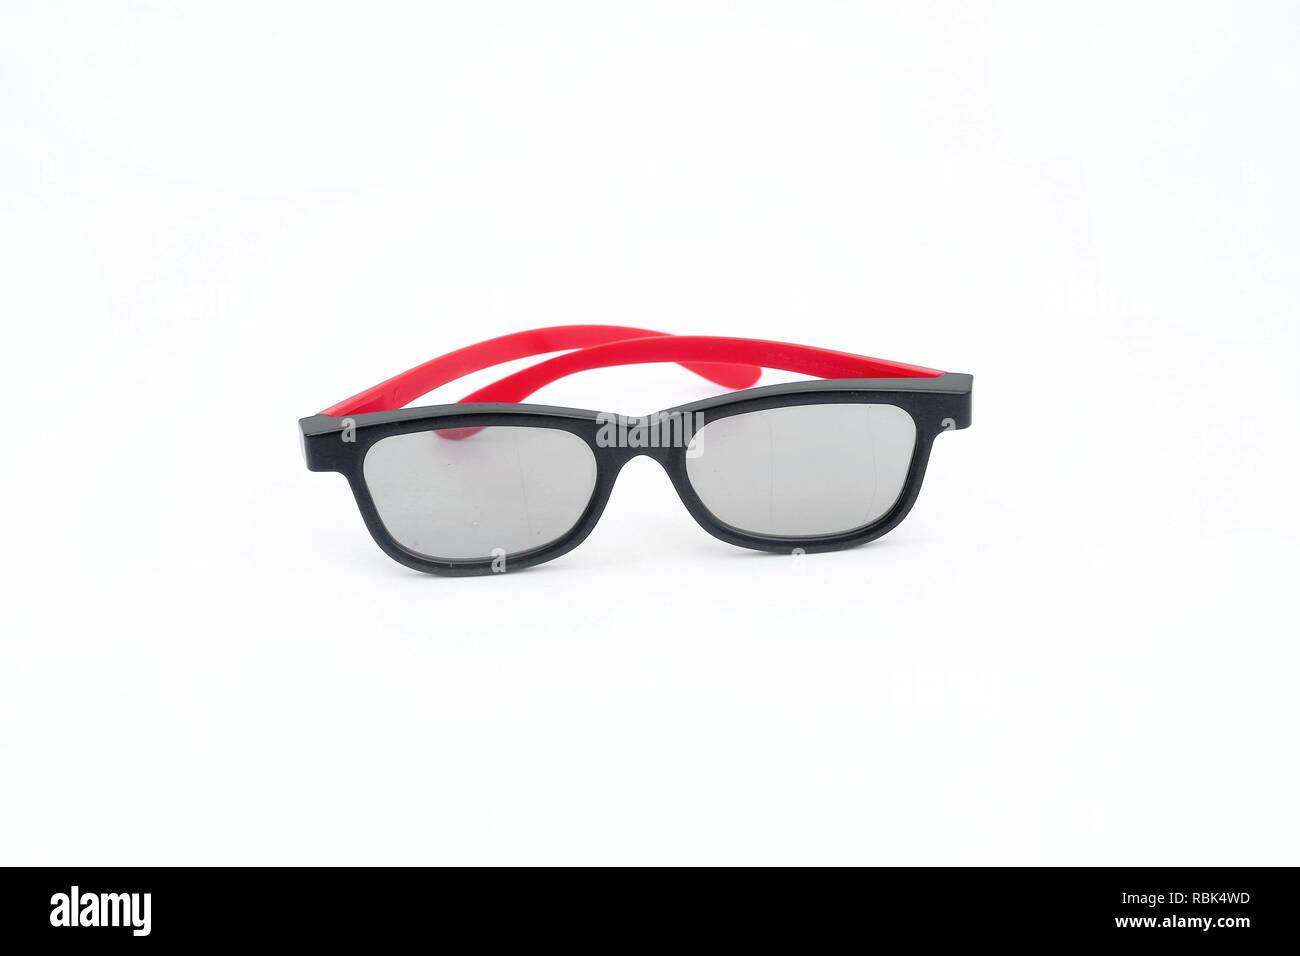 Picture of fashionable spectacles. Isolated on the white background. Stock Photo